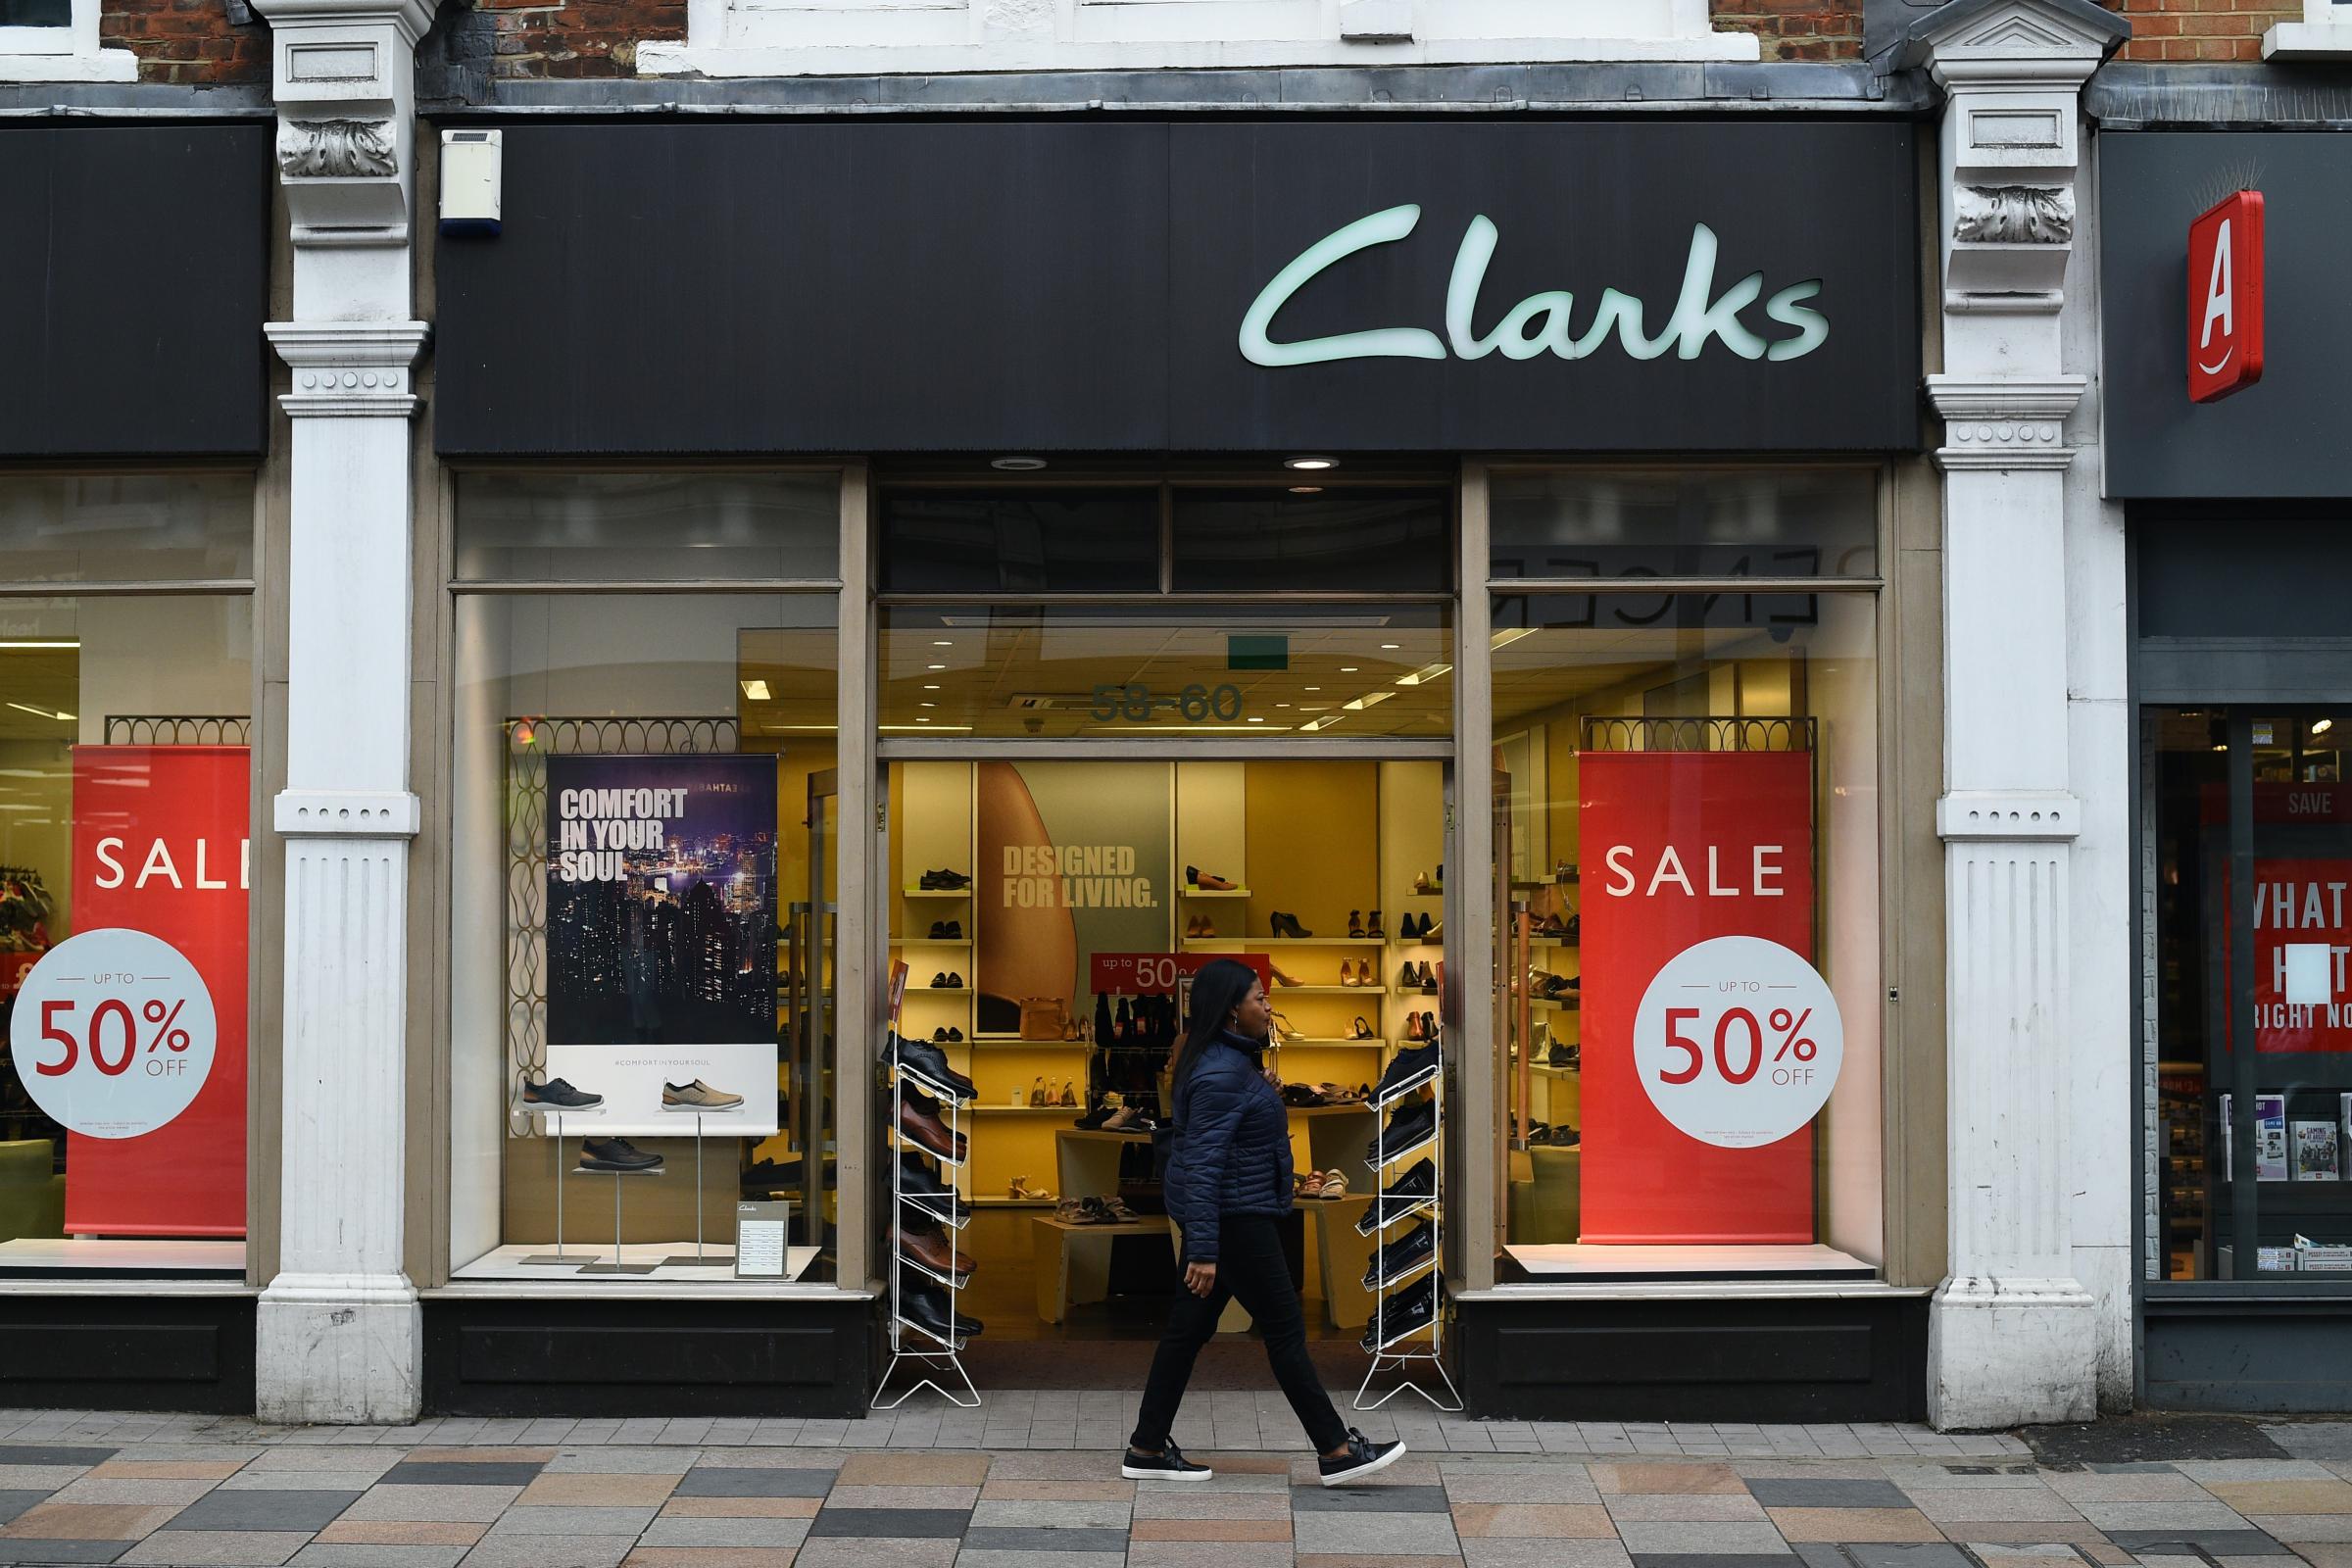 clarks shoes leicester